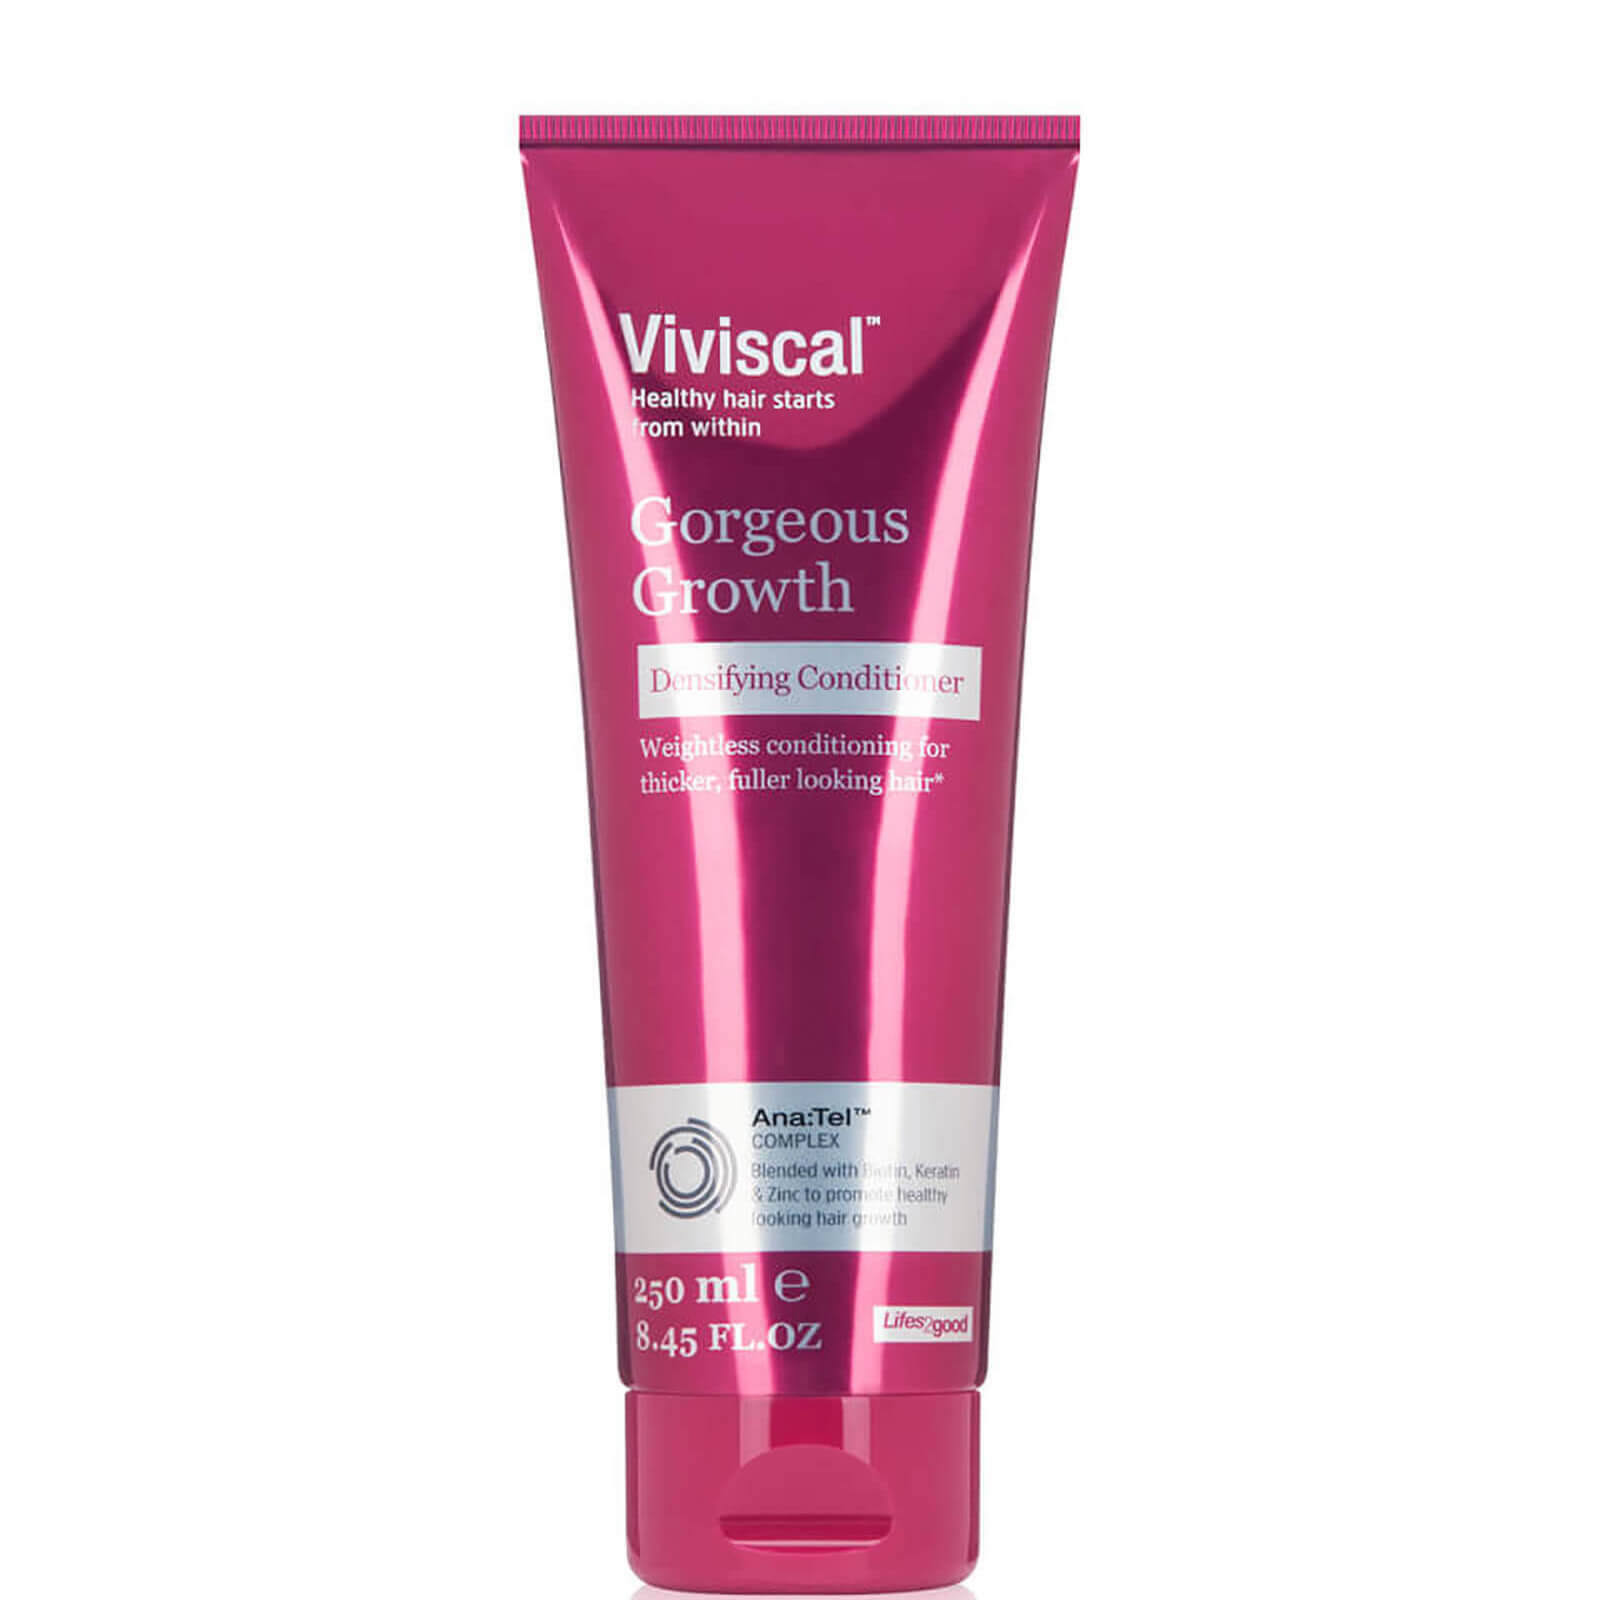 Viviscal Growth Densifying Conditioner - 8.45oz